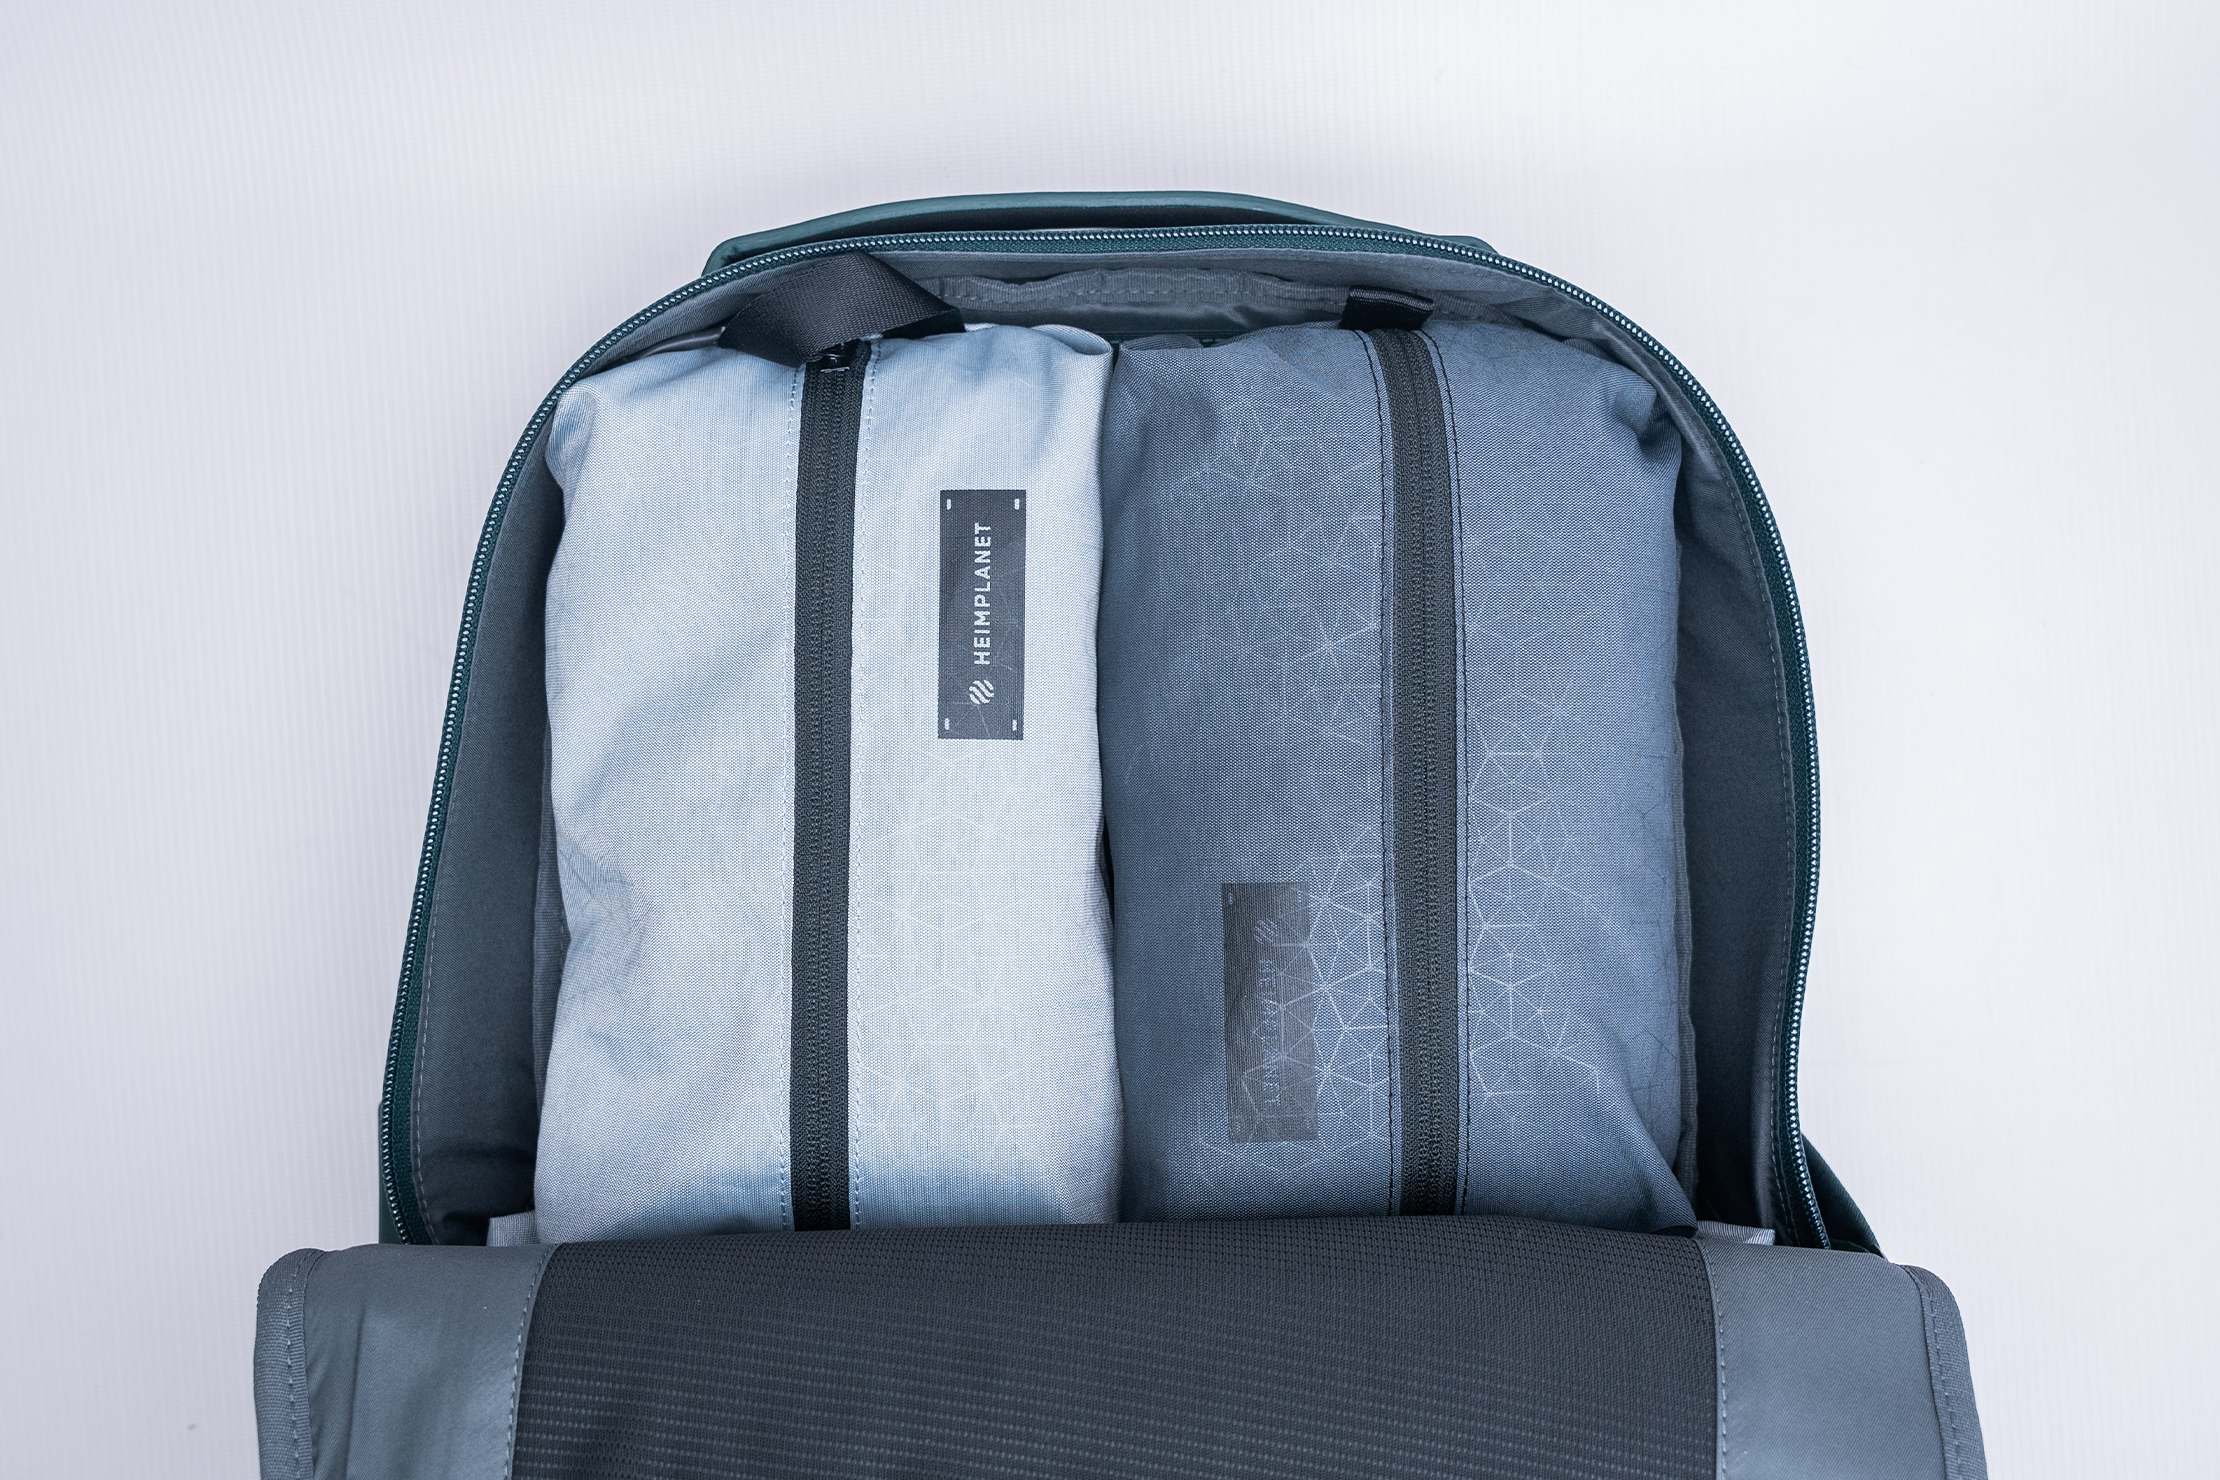 Troubadour Goods Apex Backpack 3.0 Packing Cubes